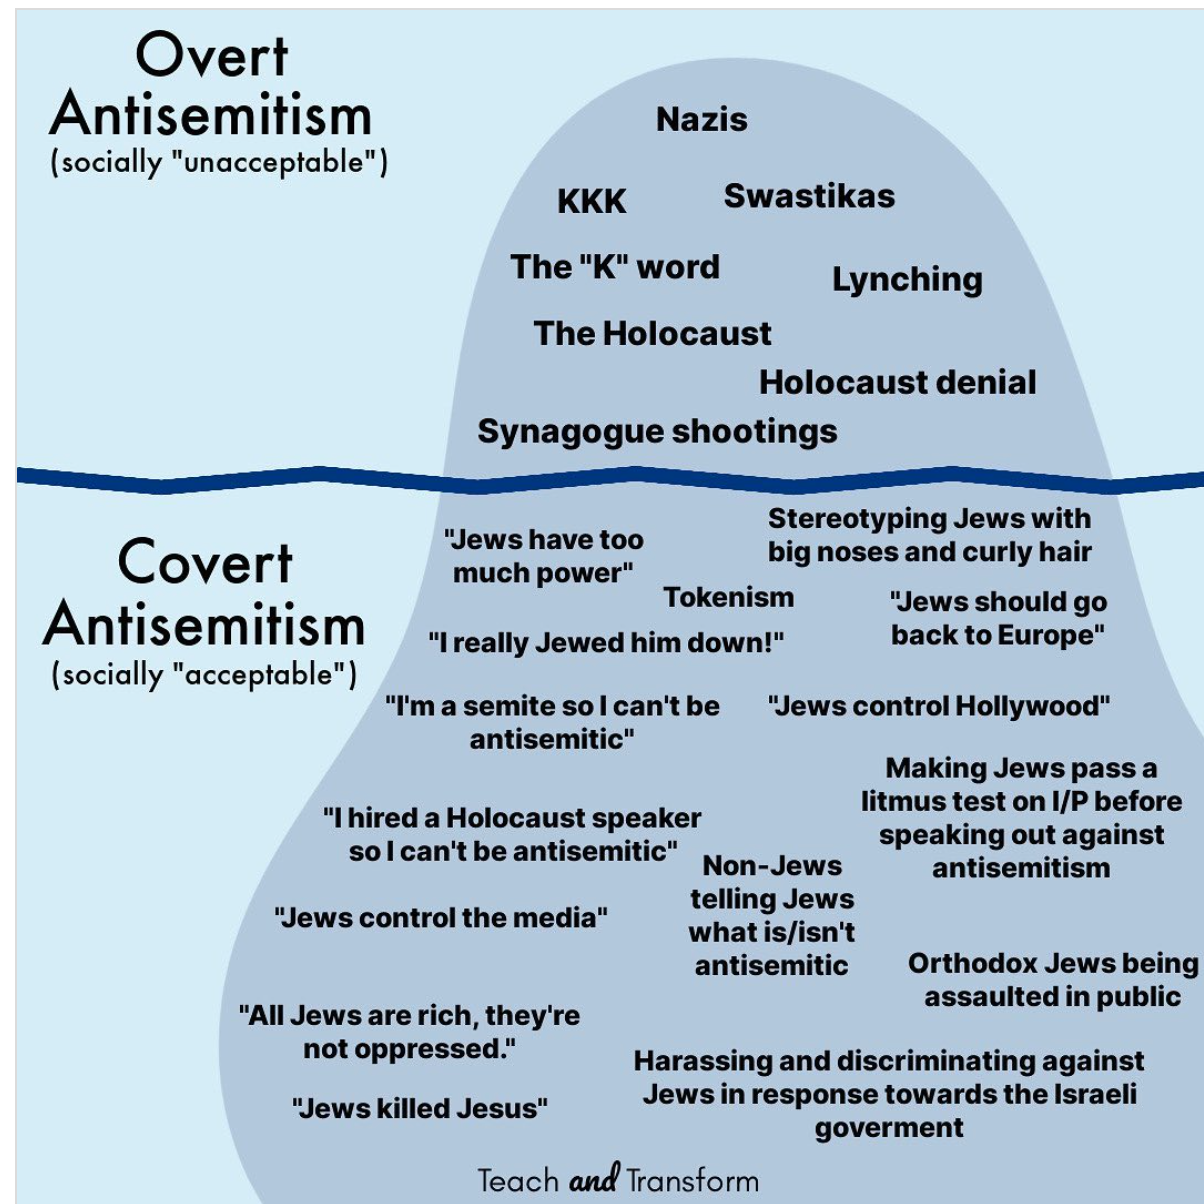 Overt Antisemitism (socially "unacceptable") KKK Nazis The "K" word Swastikas Lynching The Holocaust Holocaust denial Synagogue shootings Covert Antisemitism (socially "acceptable") Stereotyping Jews with big noses and curly hair "Jews have too much power" Tokenism "I really Jewed him down!" "I'm a semite so I can't be antisemitic" "I hired a Holocaust speaker so I can't be antisemitic" "Jews control the media" "Jews should go back to Europe" "Jews control Hollywood" Non-Jews telling Jews what is/isn't antisemitic Making Jews pass a litmus test on I/P before speaking out against antisemitism "All Jews are rich, they're not oppressed." "Jews killed Jesus" Orthodox Jews being assaulted in public Harassing and discriminating against Jews in response towards the Israeli goverment Teach and Transform